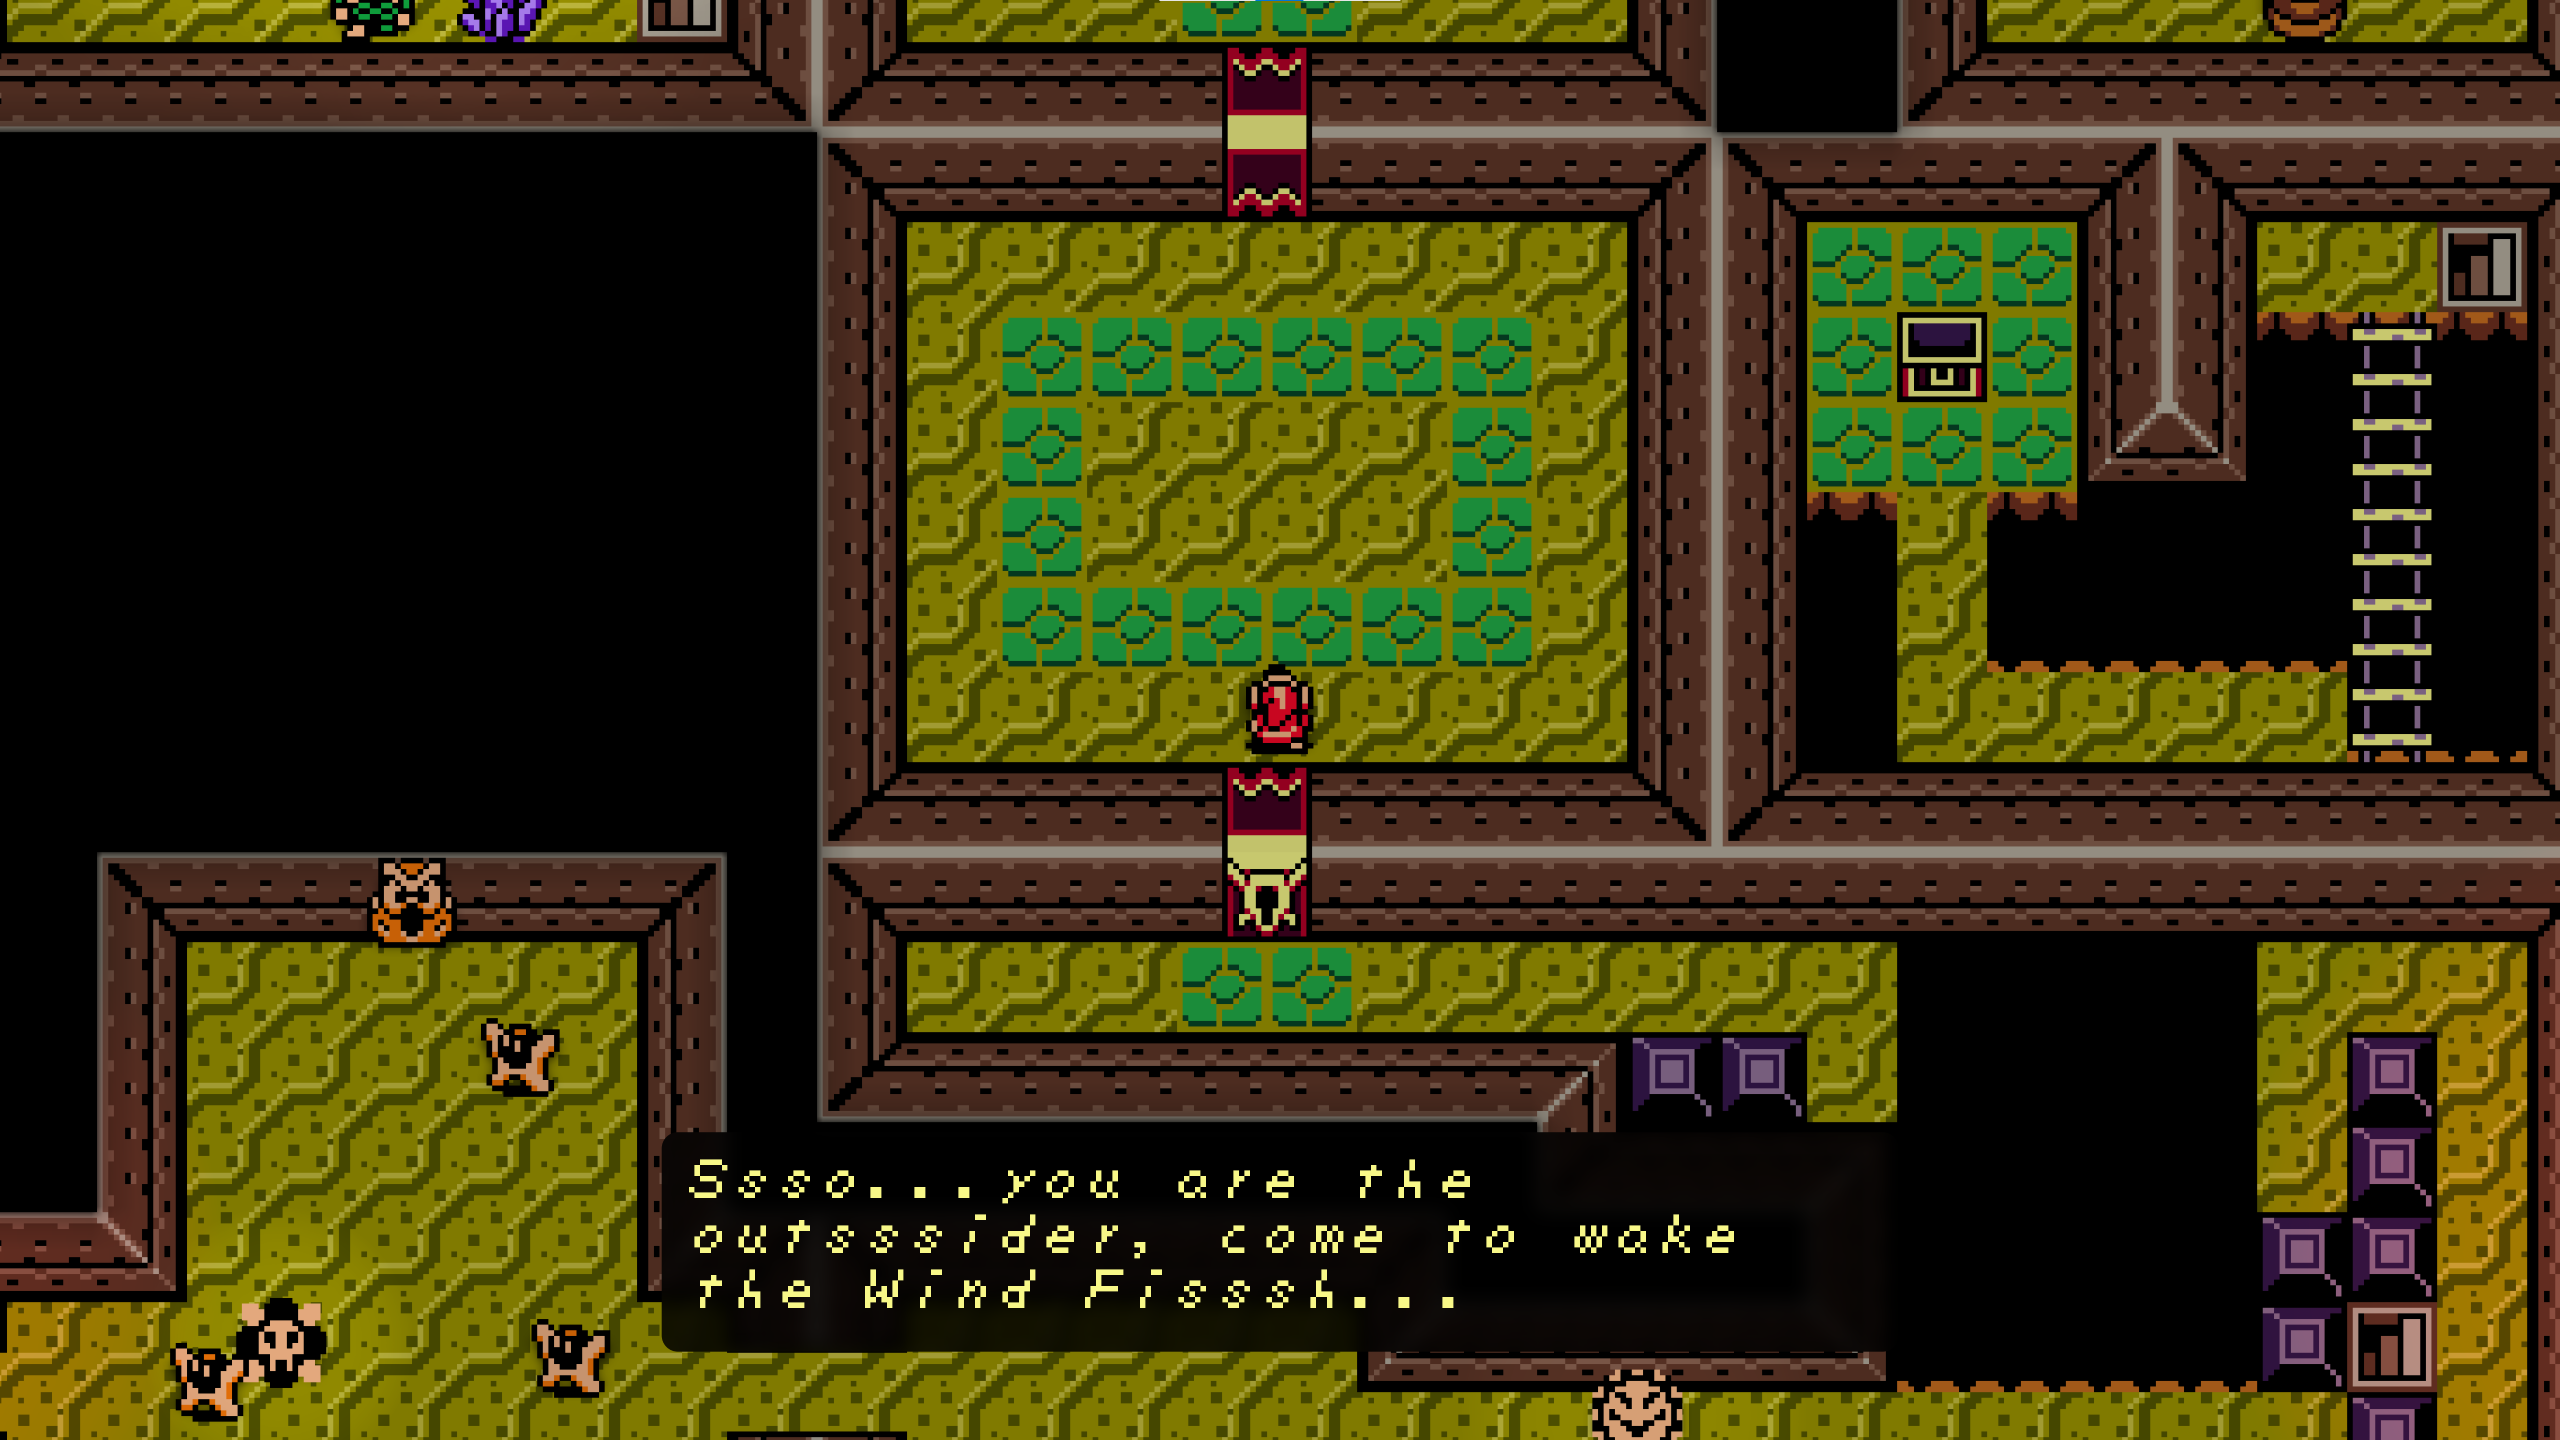 A screenshot from the Catfish's Maw dungeon in Link's Awakening. The text "Ssso...you are the outsssider, come to wake the Wind Fisssh..." is visible.